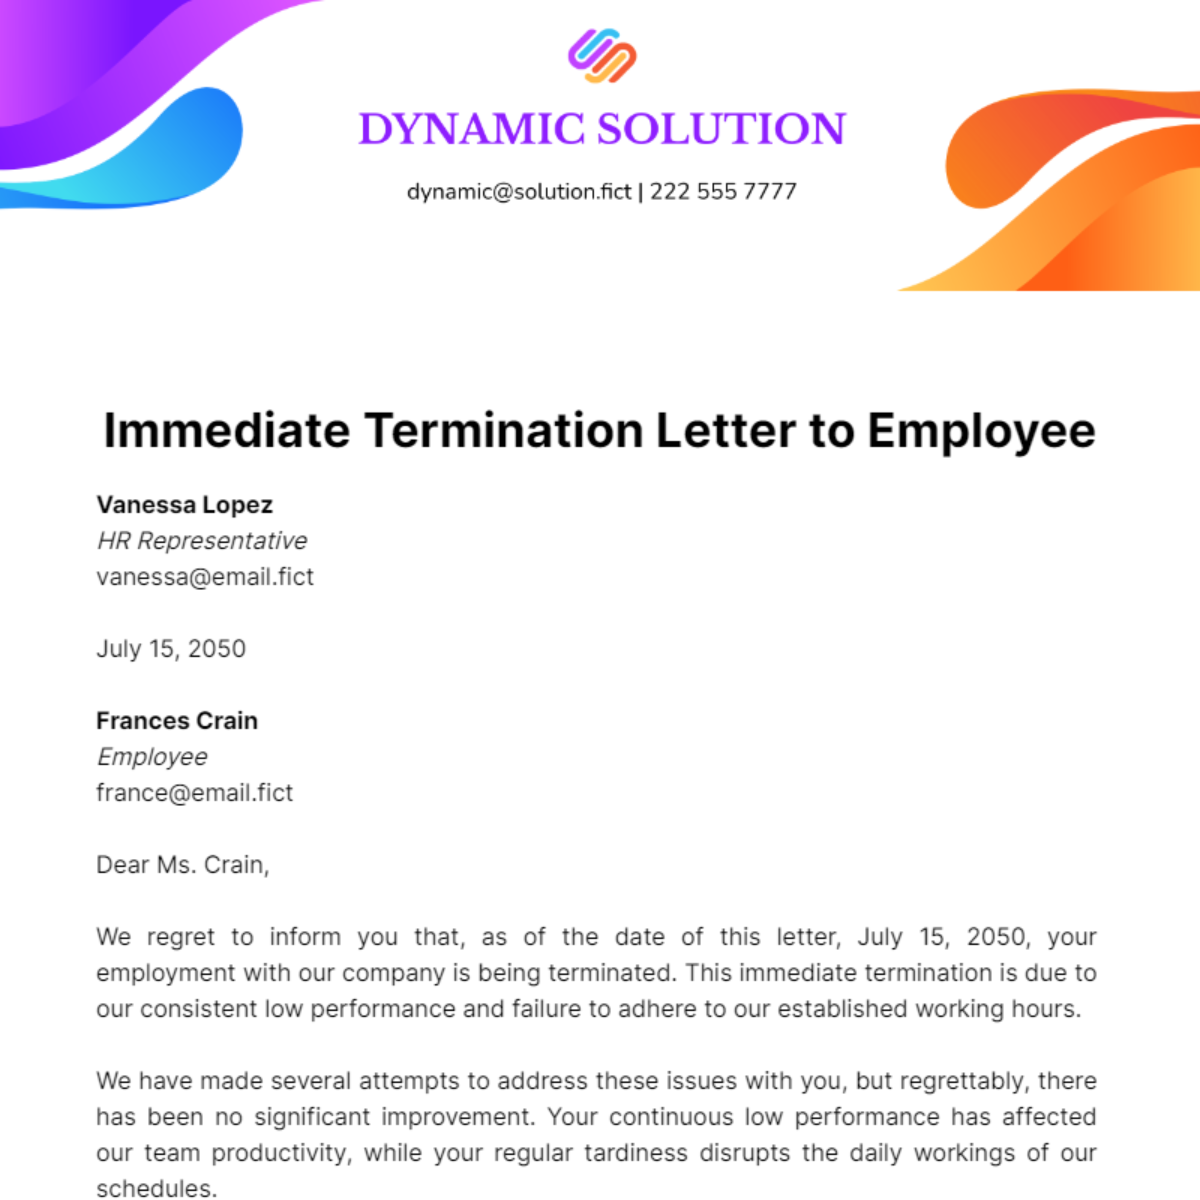 Immediate Termination Letter to Employee Template